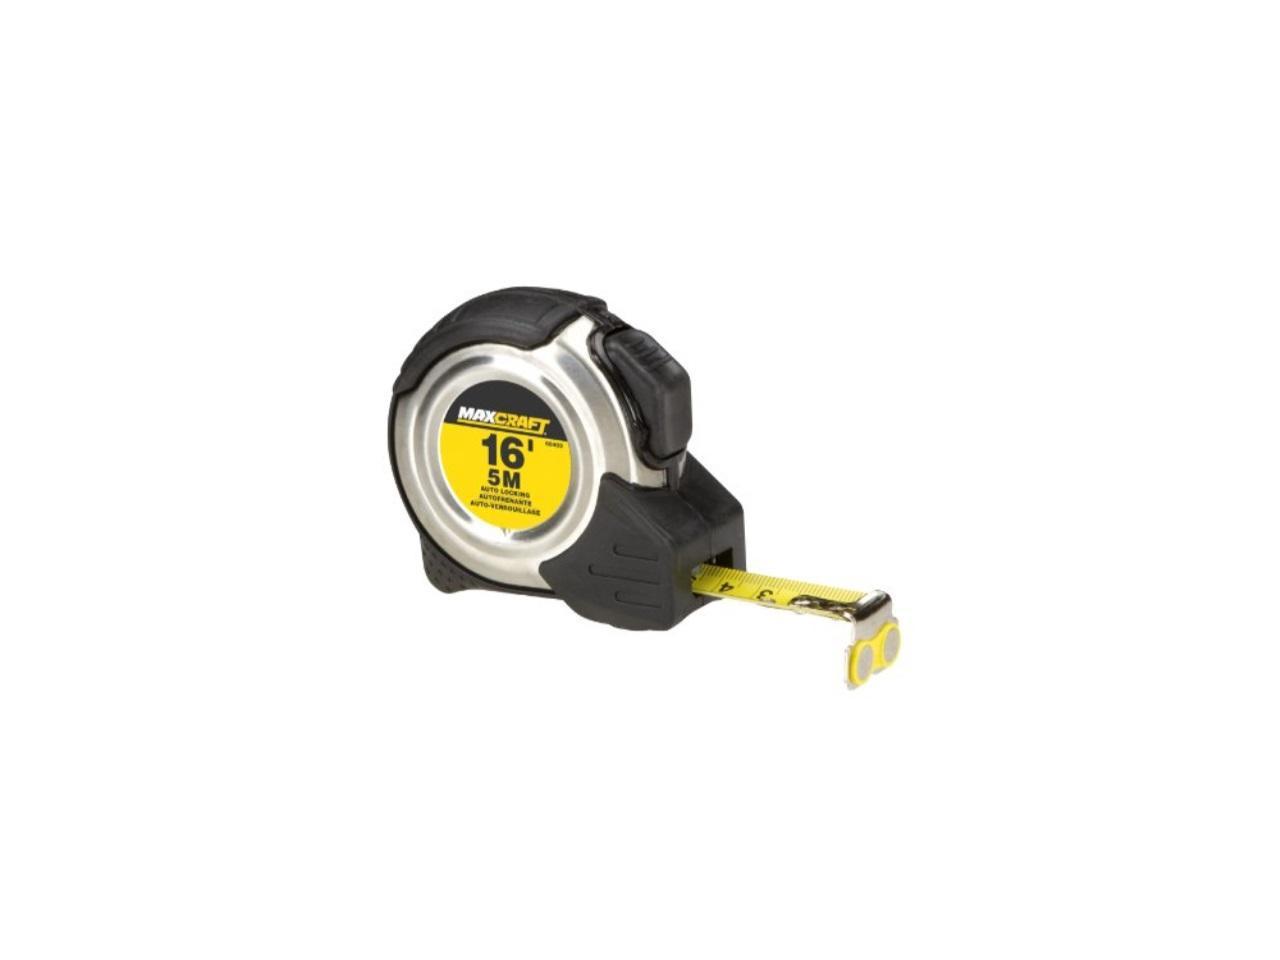 Maxcraft 60403 16-Foot by 3/4-Inch Auto Locking Tape Measure